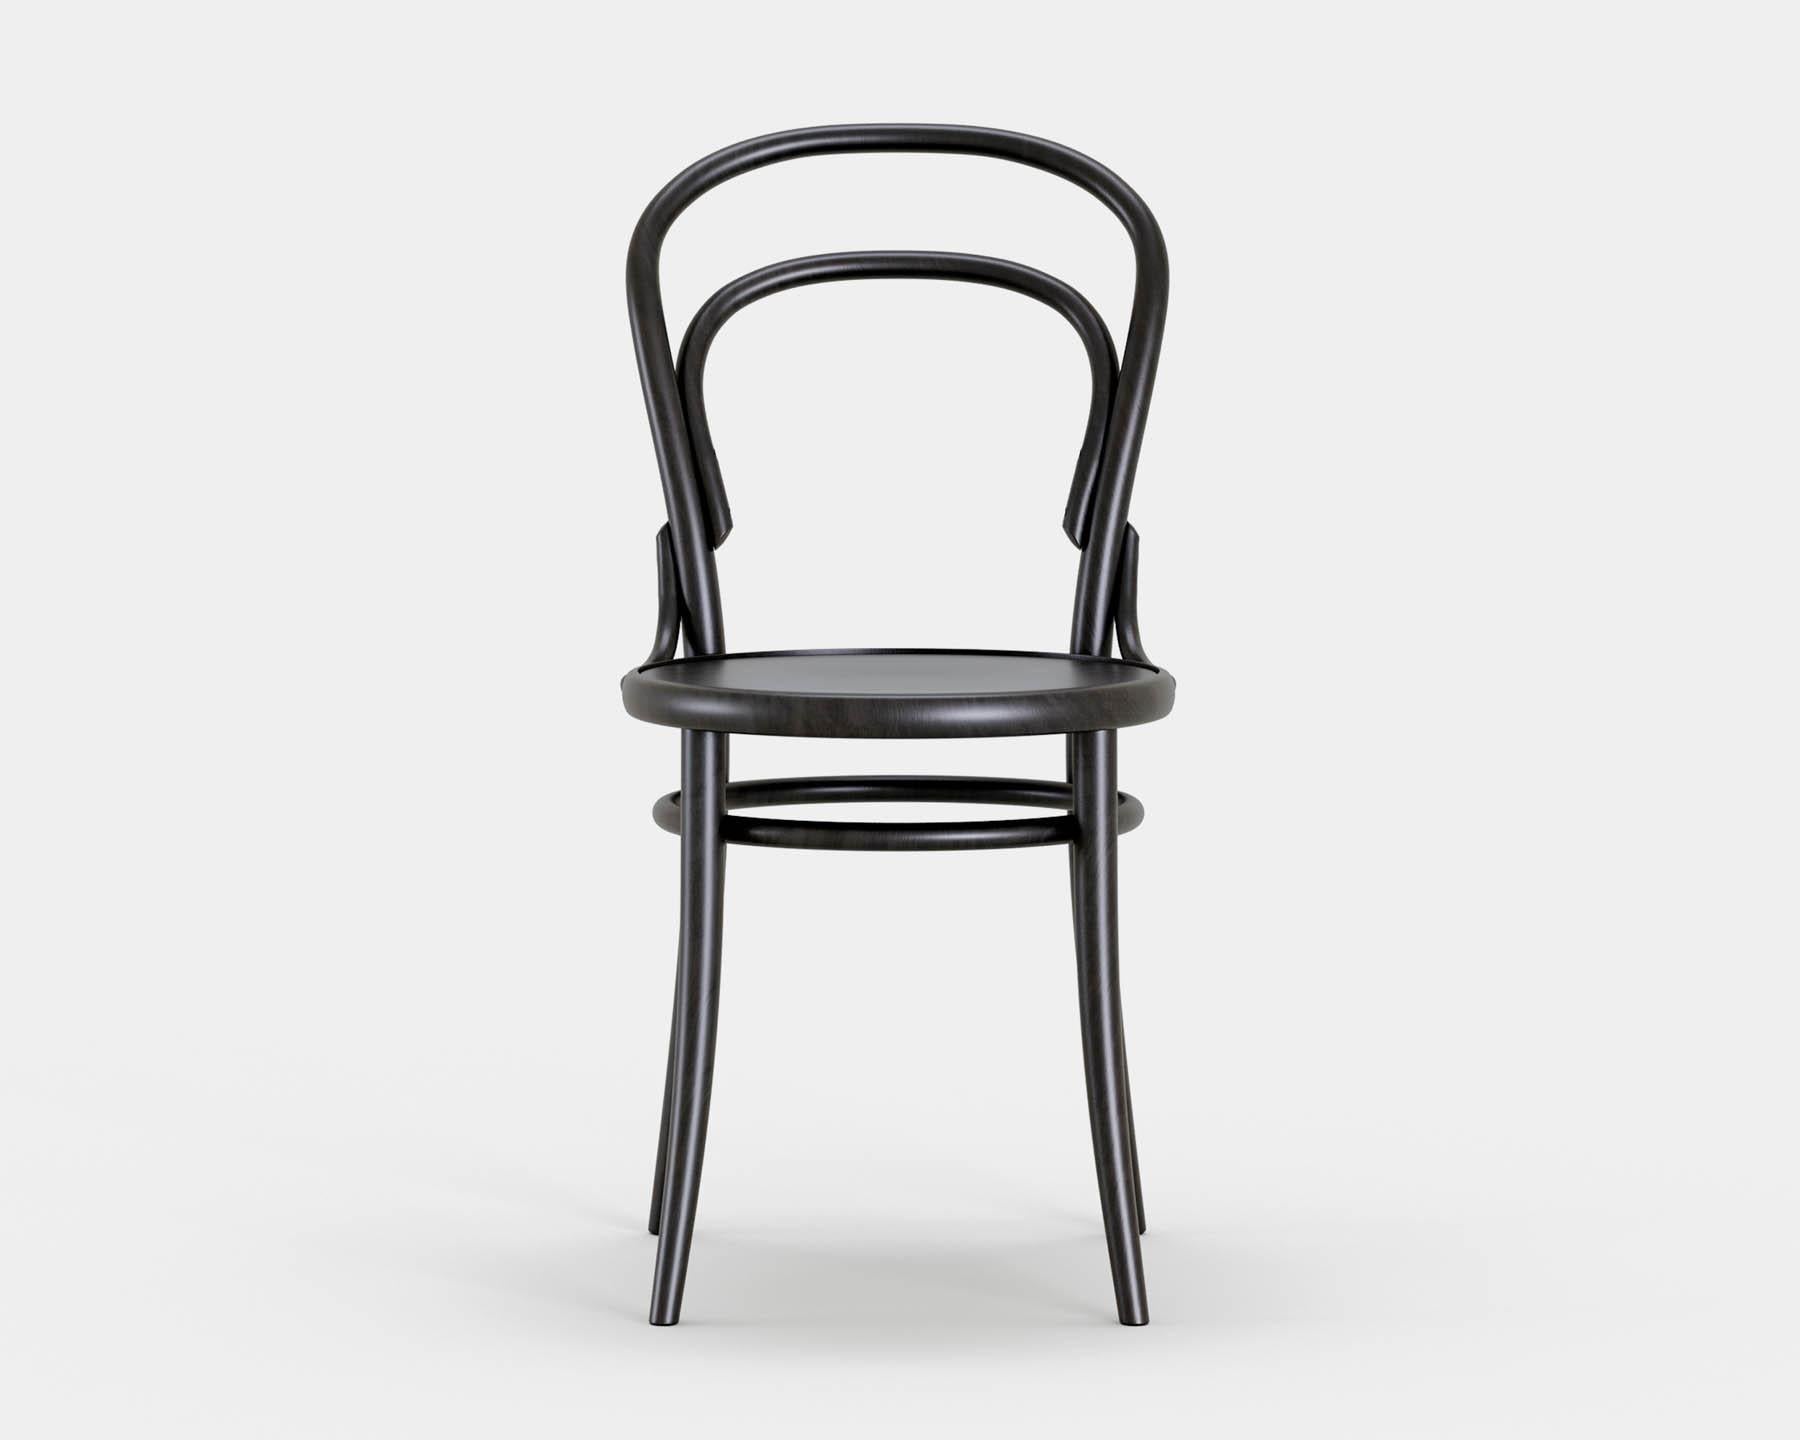 Chair No. 14
Iconic bistro chair conceived by Michael Thonet in 1869, now produced in the same manufacture in Czech Republic by TON. 

Wood: solid beech 
Finish: black stain
Seat: plain wood 

--
Chair no. 14 by TON is one of the oldest,